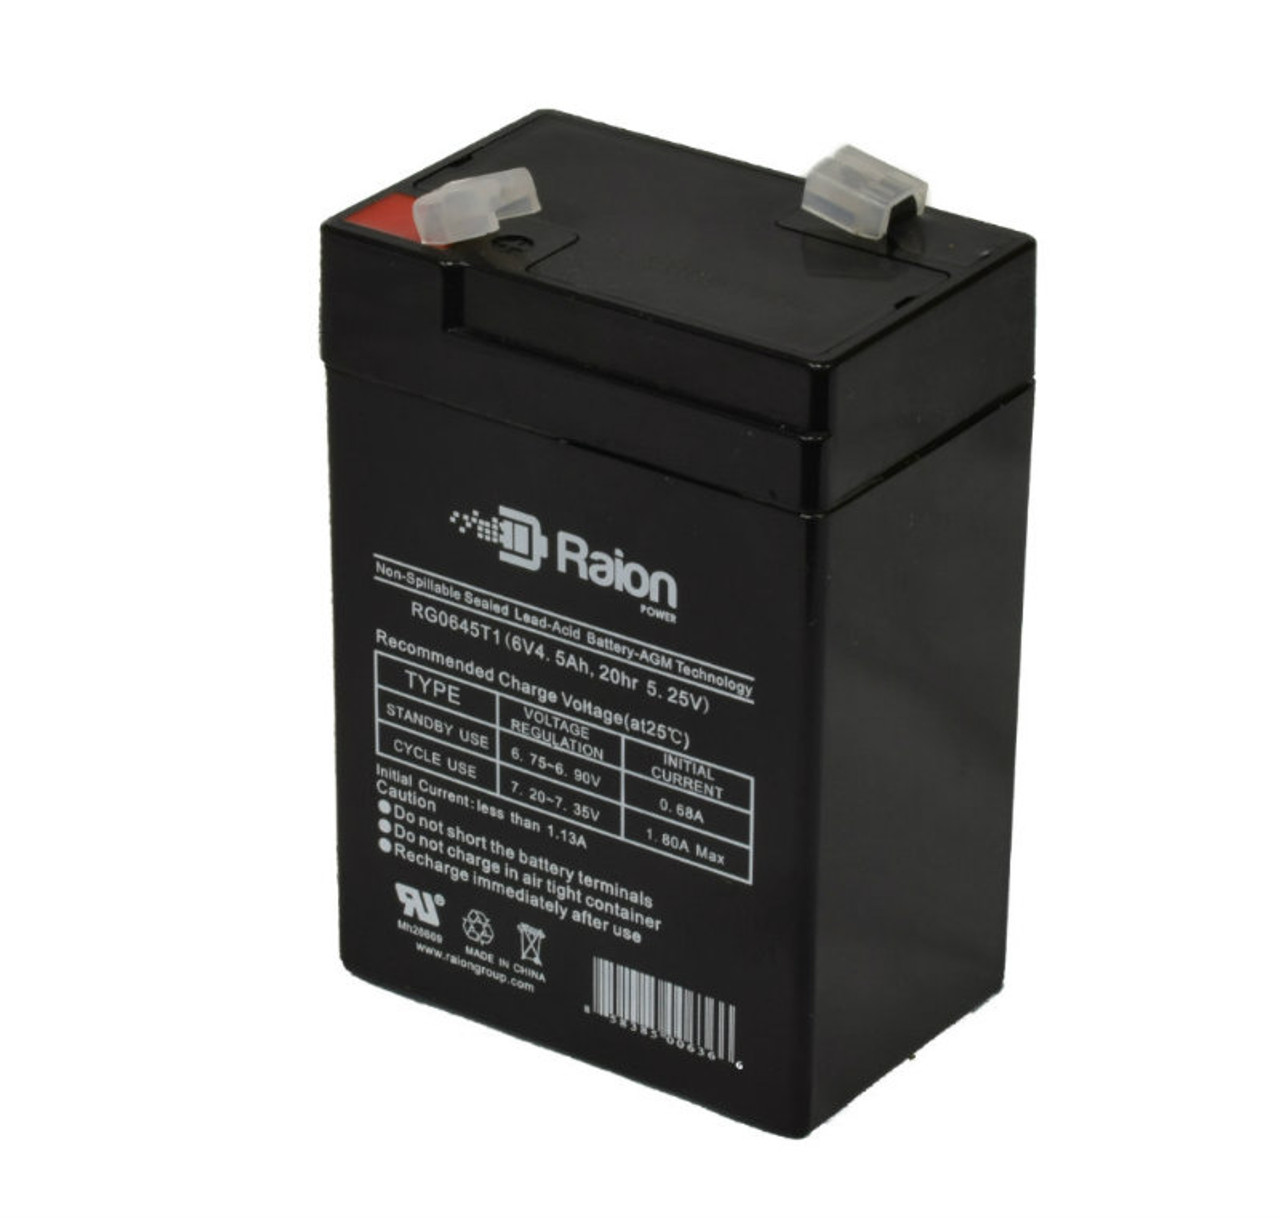 Raion Power RG0645T1 6V 4.5Ah Replacement Battery Cartridge for Edwards 1637